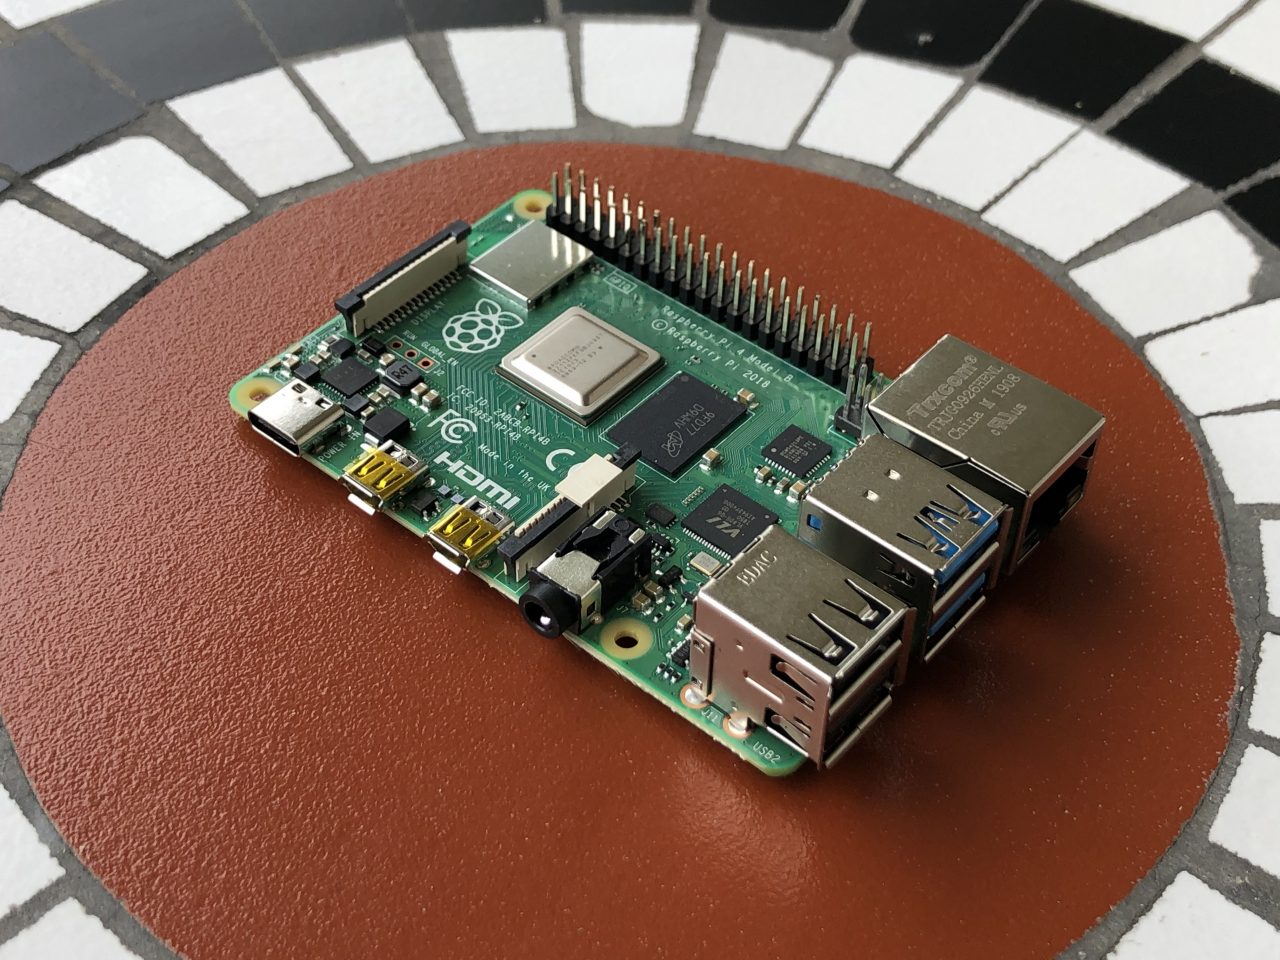 What can you do with a raspberry pi